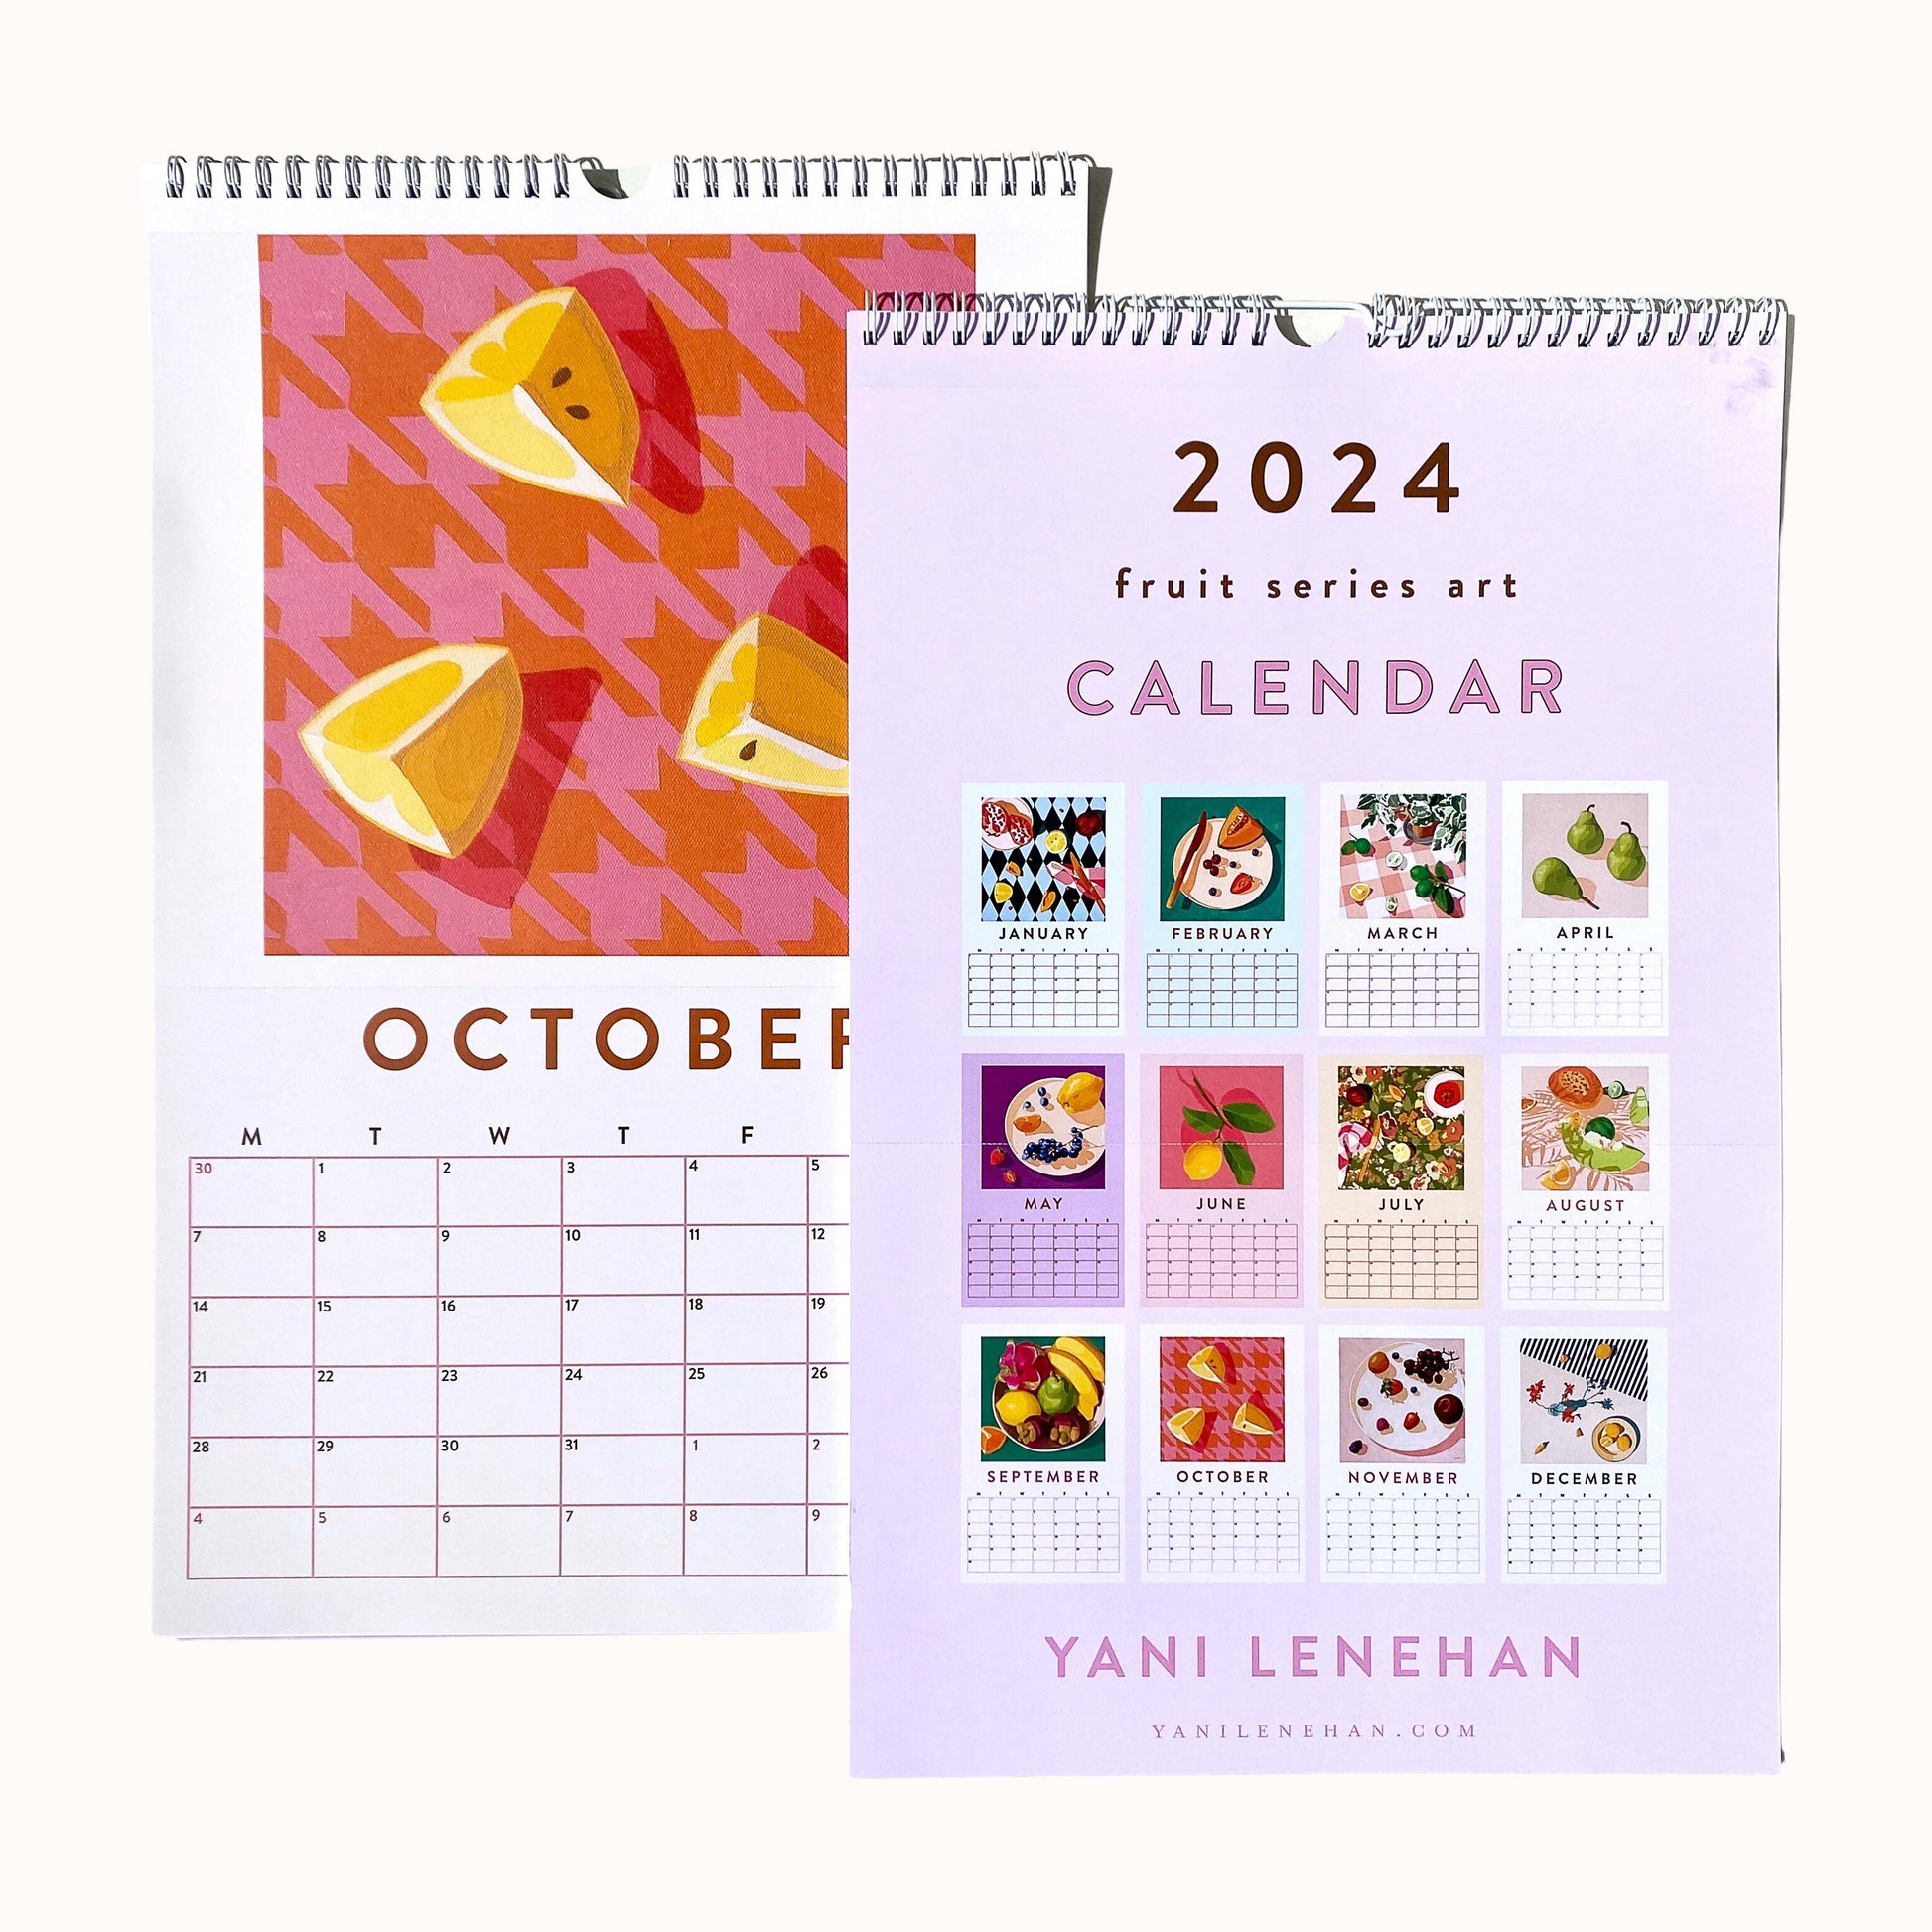 2024 art wall calendar back cover in A3 size featuring the 12 internal month pages with each month original oil painting artwork